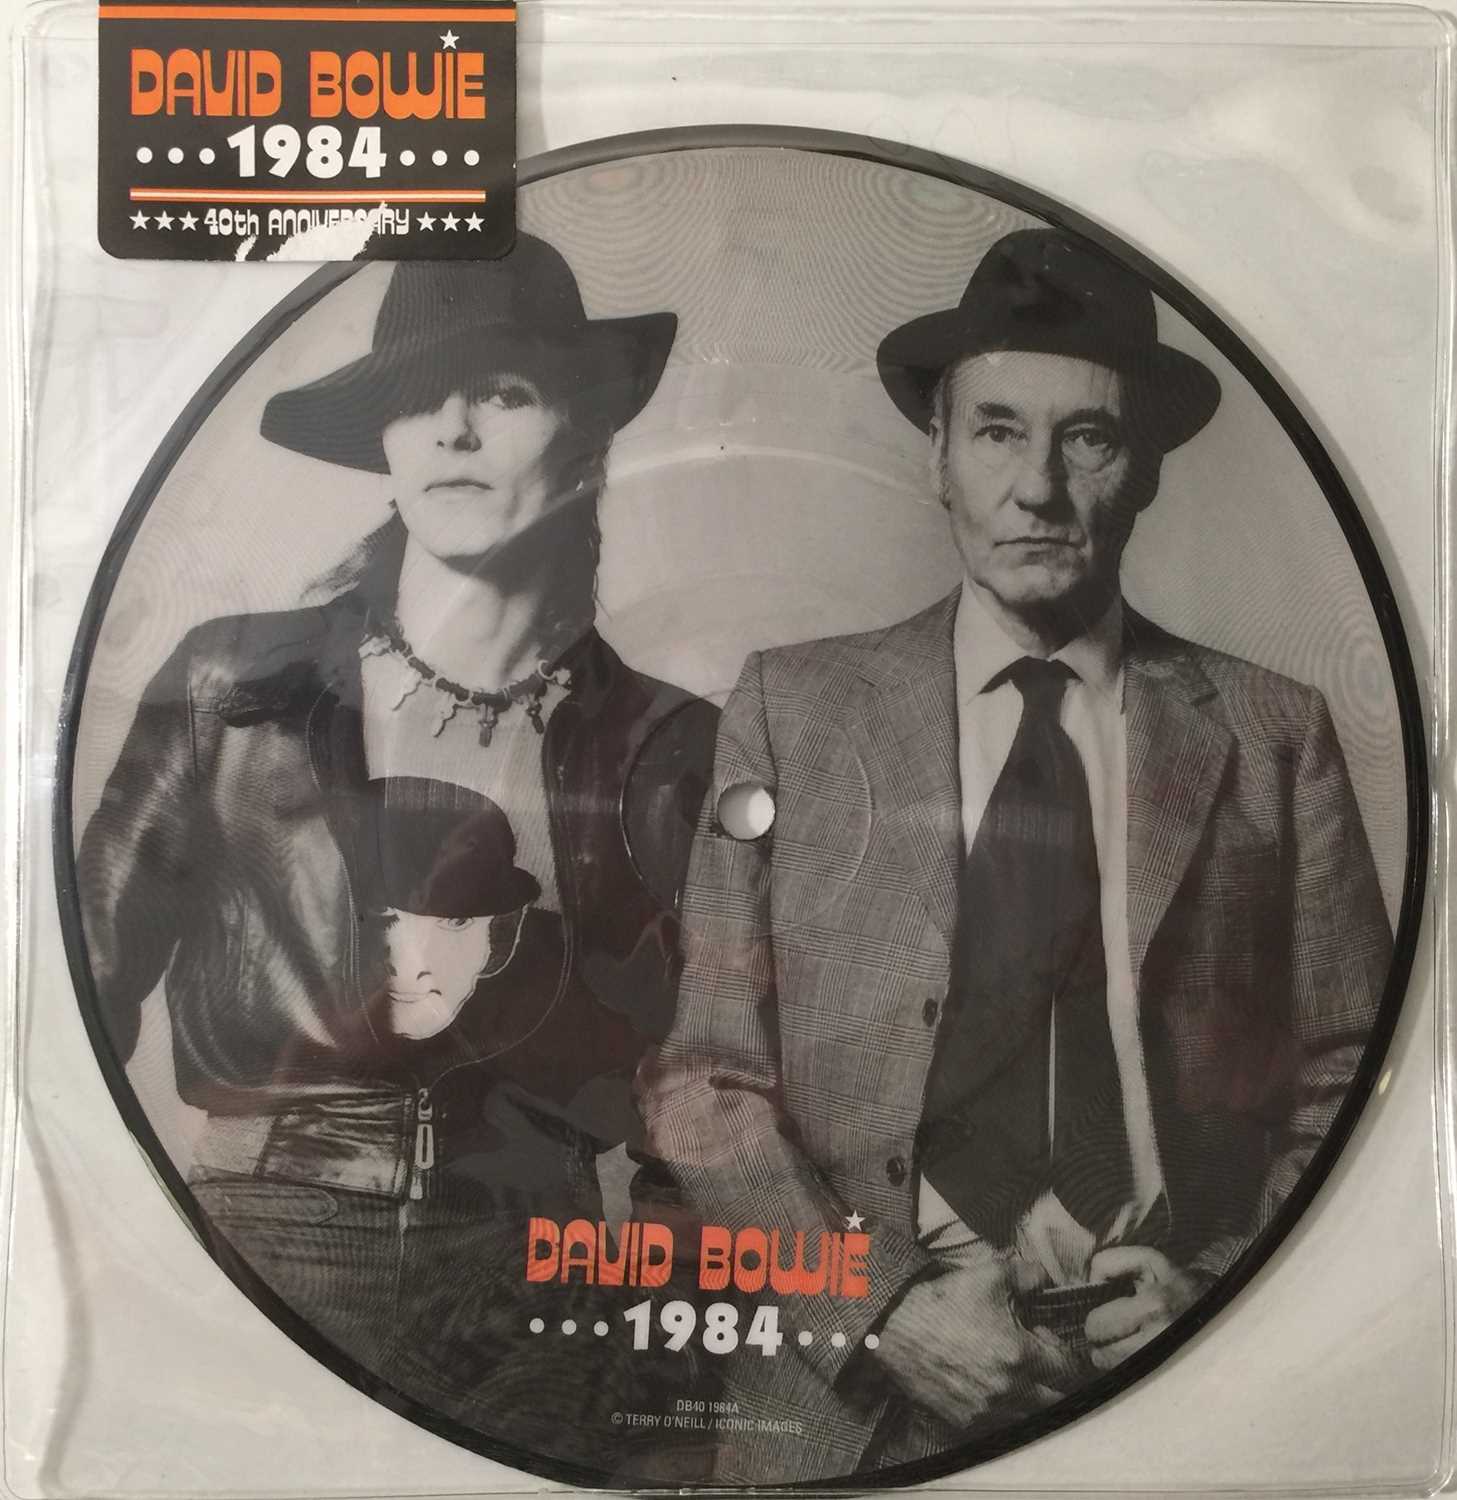 DAVID BOWIE - 1984 7" (40TH ANNIVERSARY 2014 PICTURE DISC RELEASE - DB40 1984)